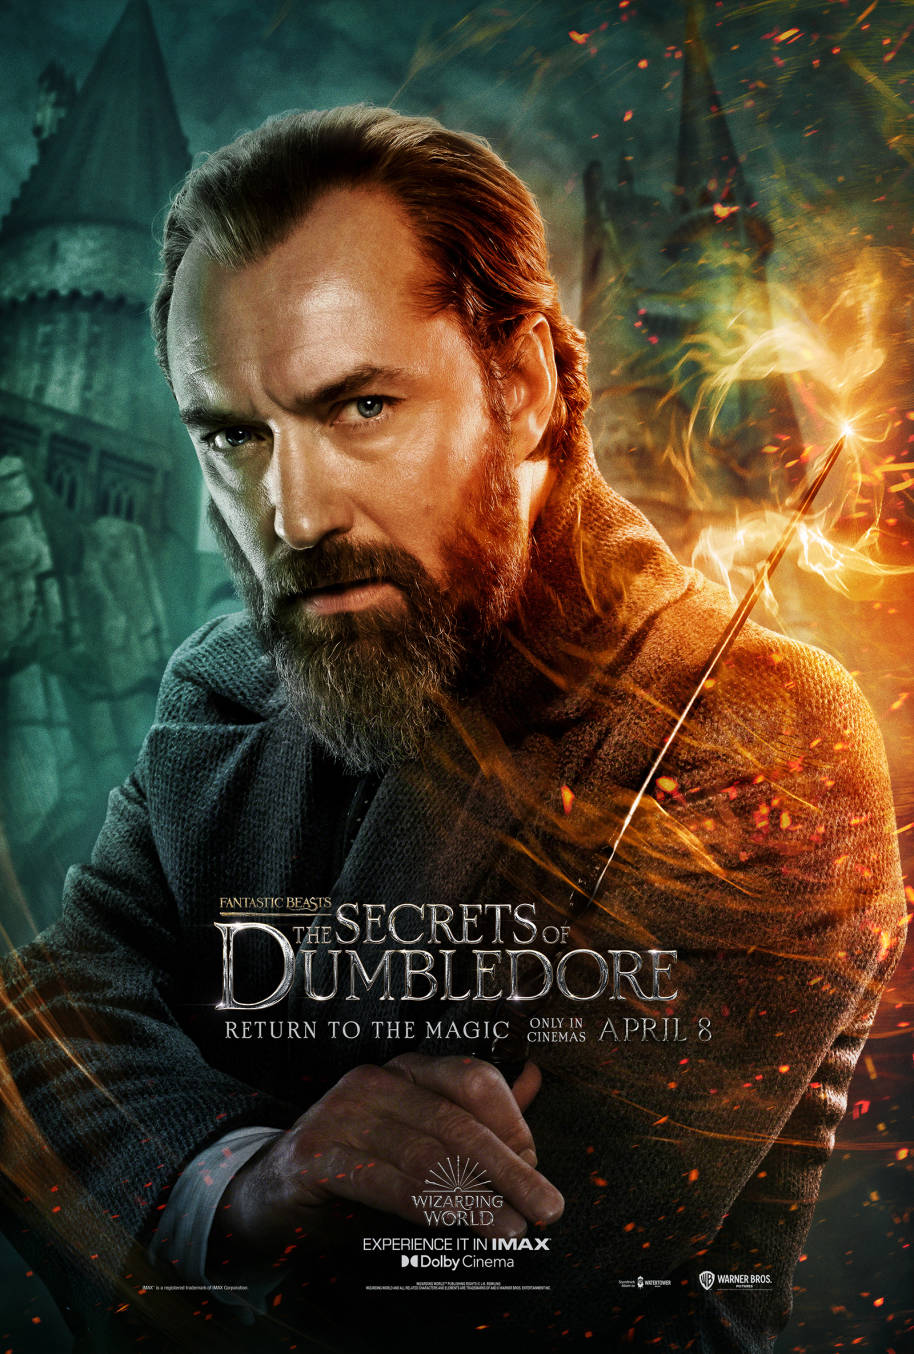 Poster of Jude Law as Albus Dumbledore in Fantastic Beasts: the Secrets of Dumbledore.